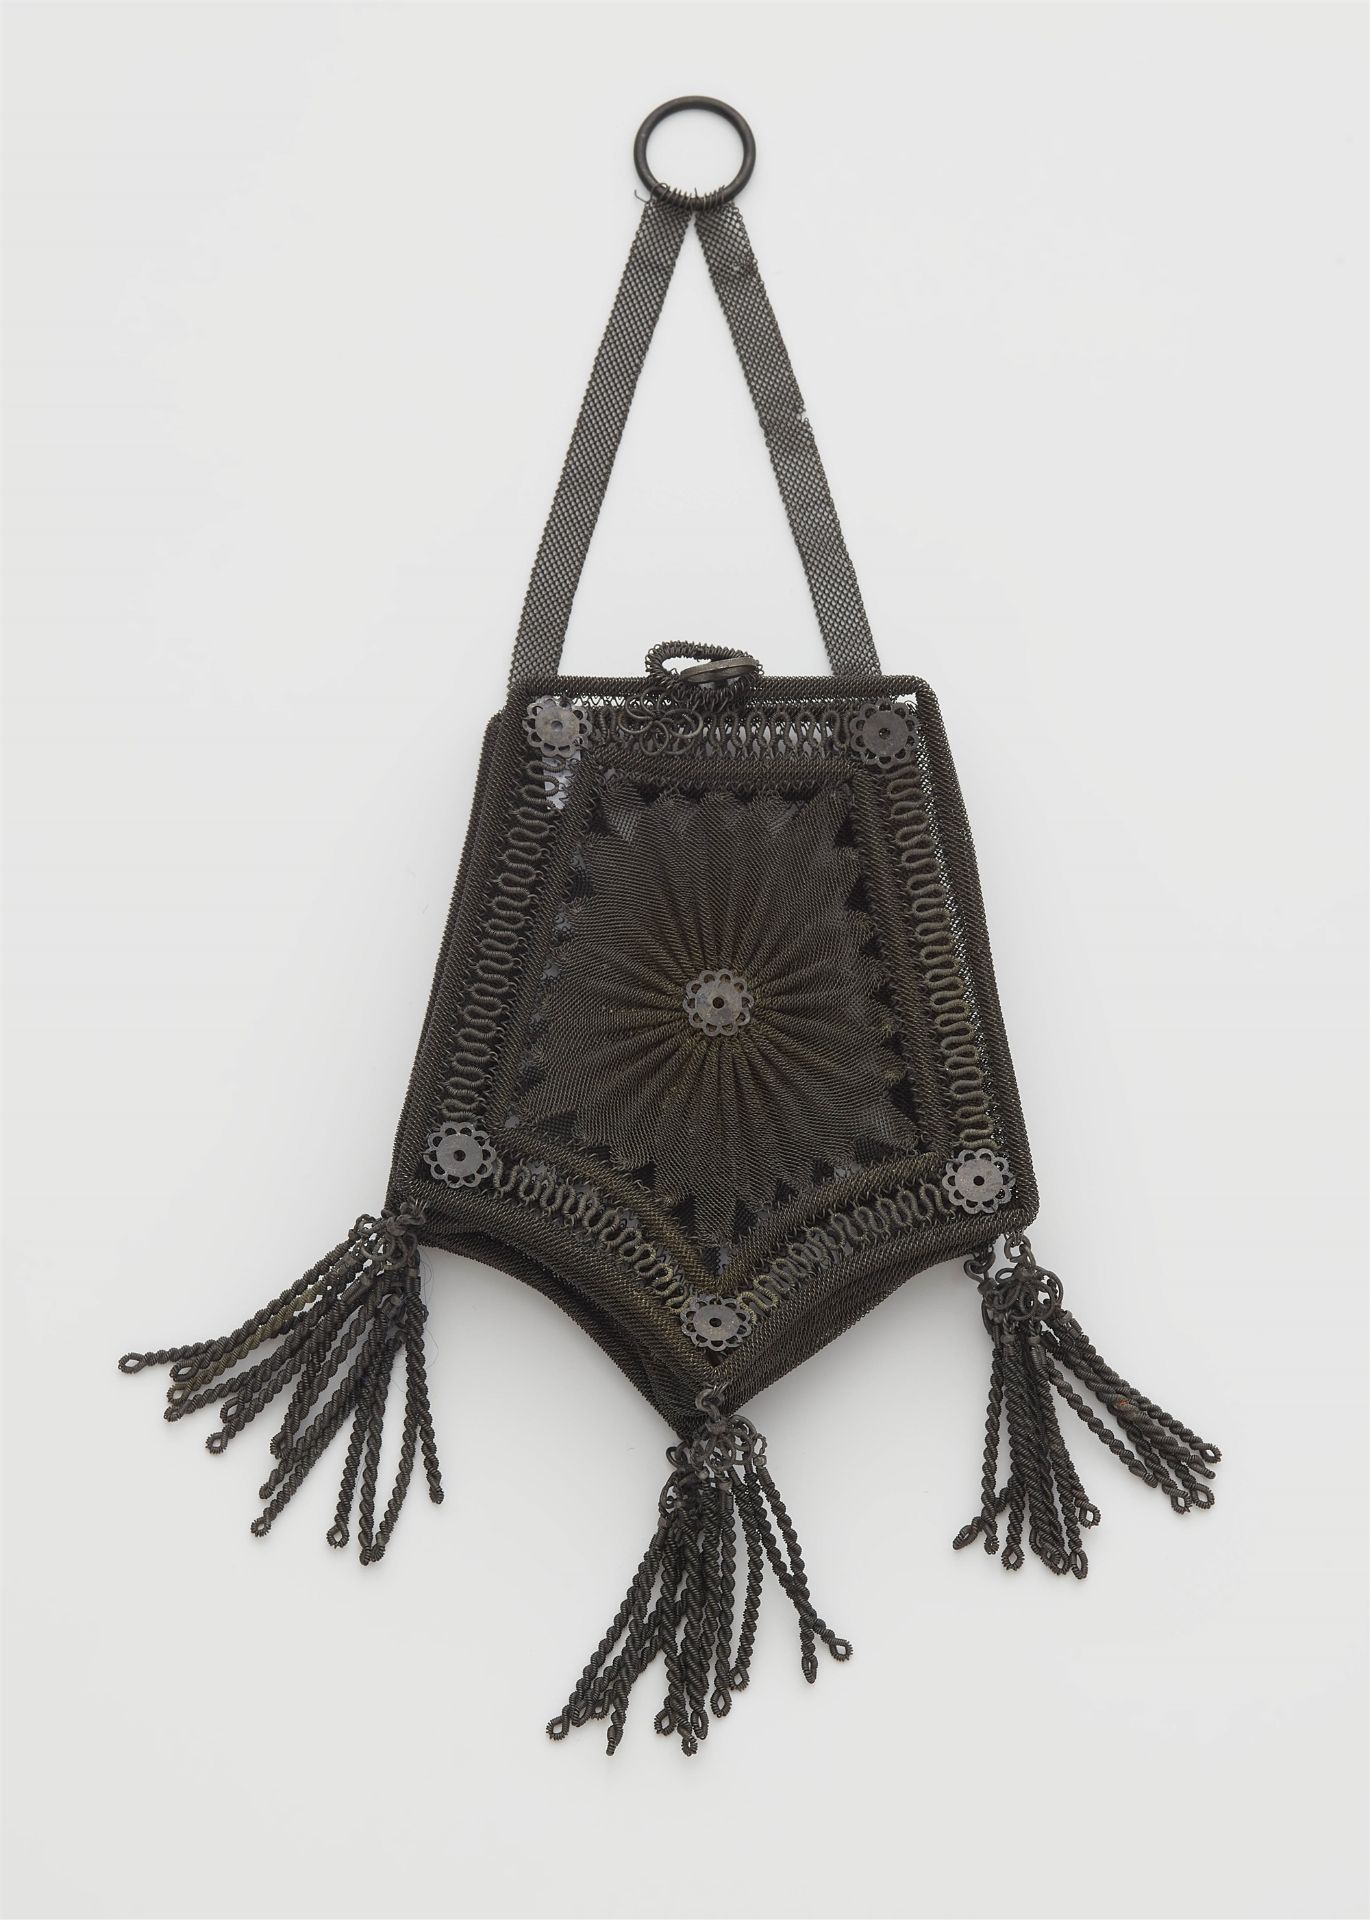 An small Berlin or Viennese gauze-like pouch woven from steel wire with tassel pendants.